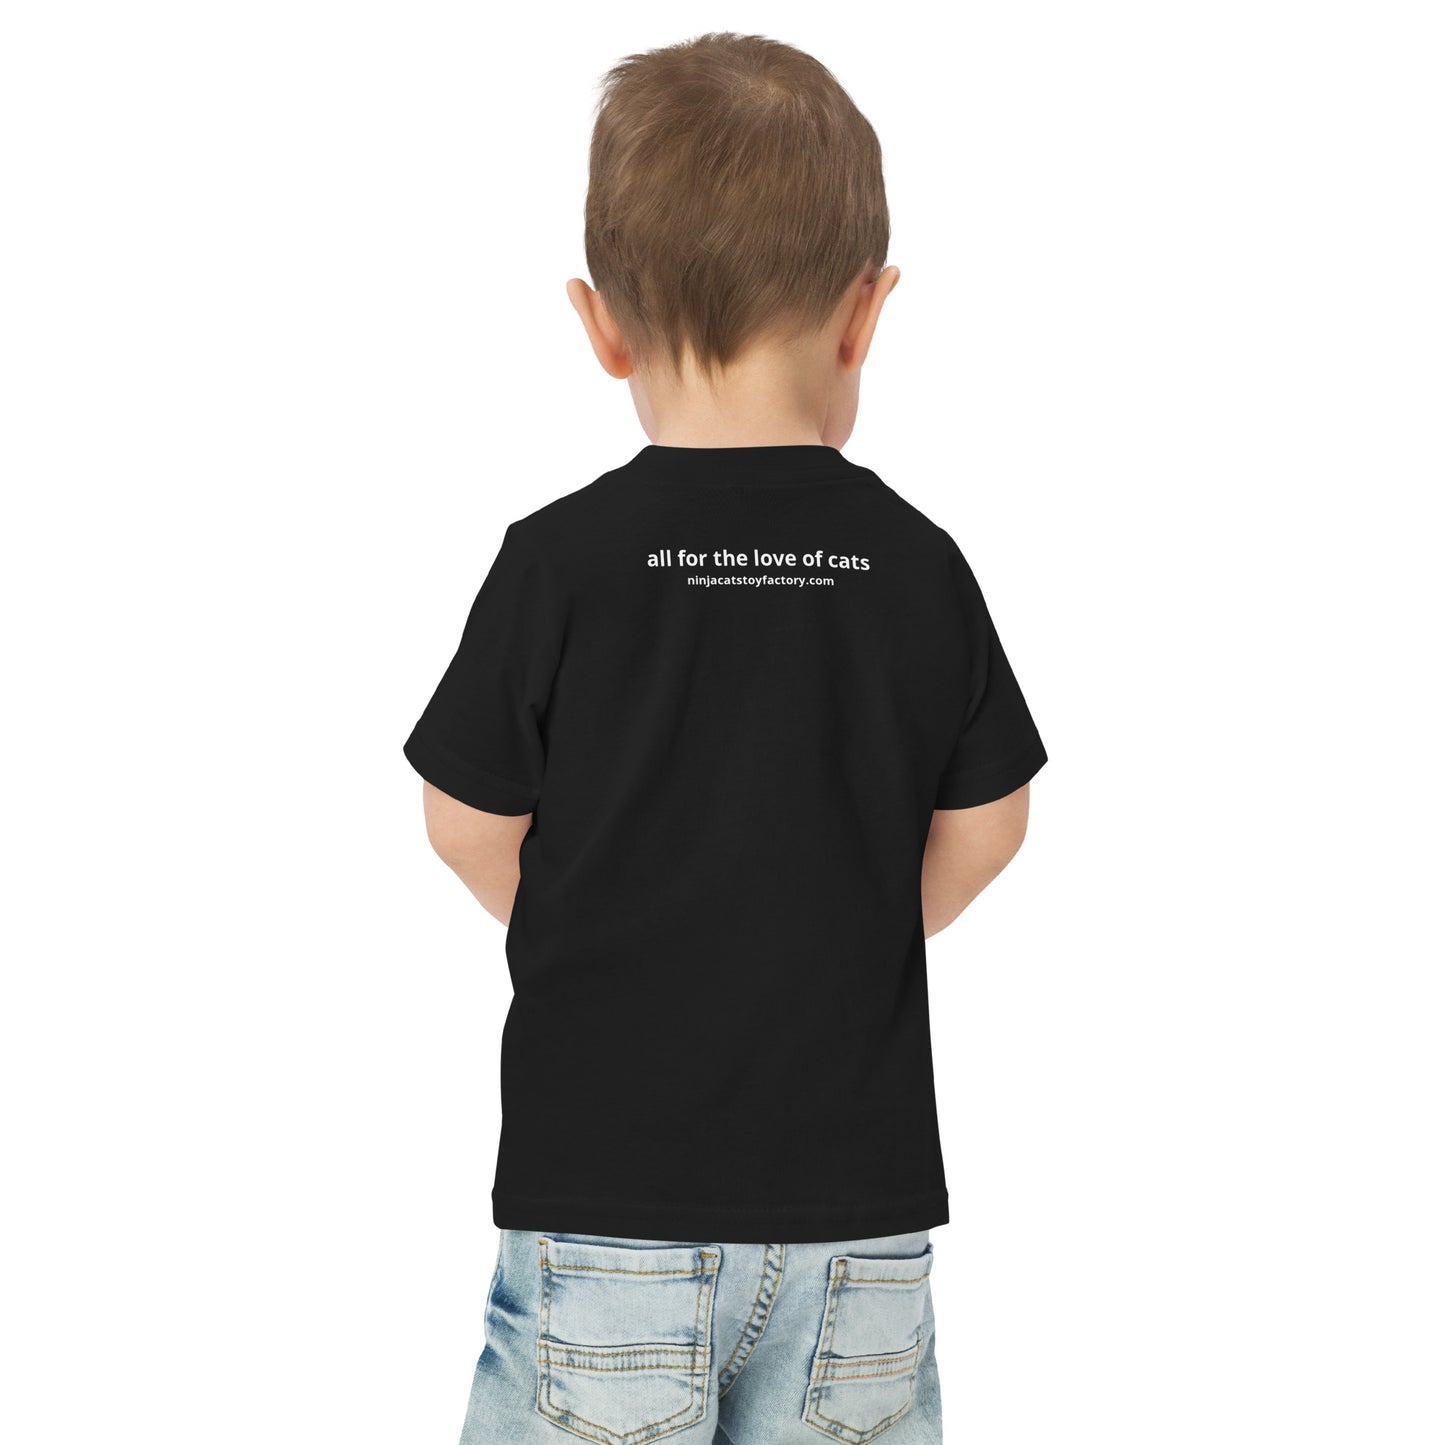 Peace Love Paws Toddler Tee - black